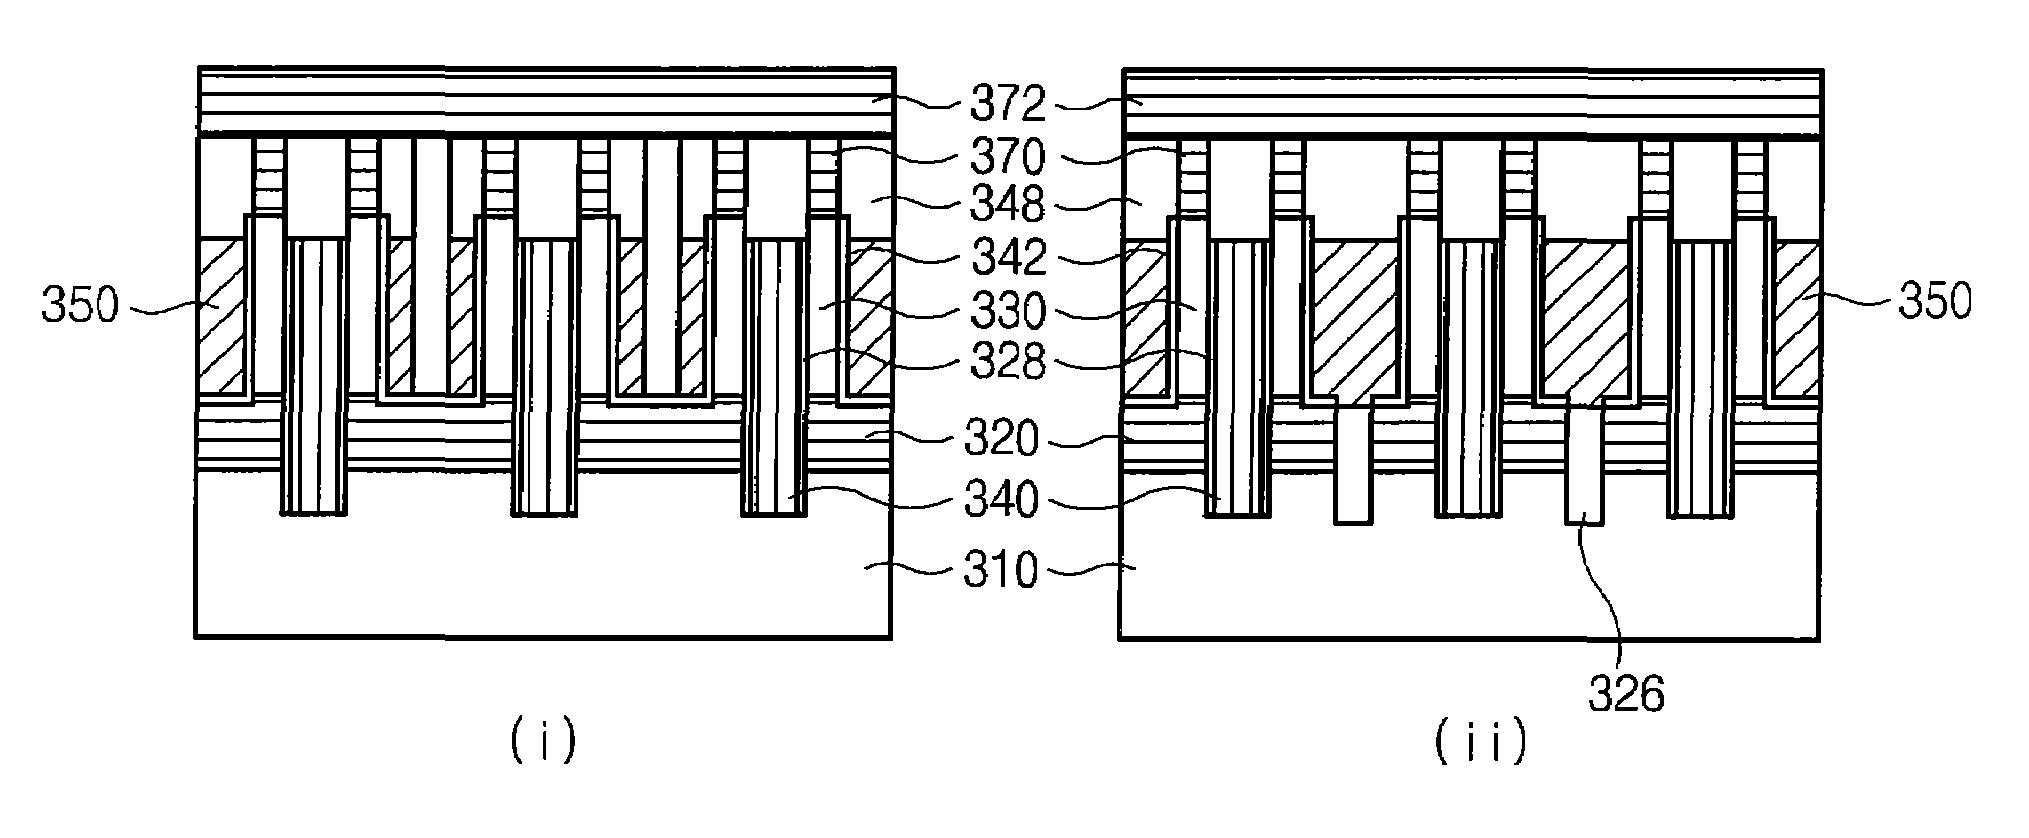 Vertical floating body cell of a semiconductor device and method for fabricating the same